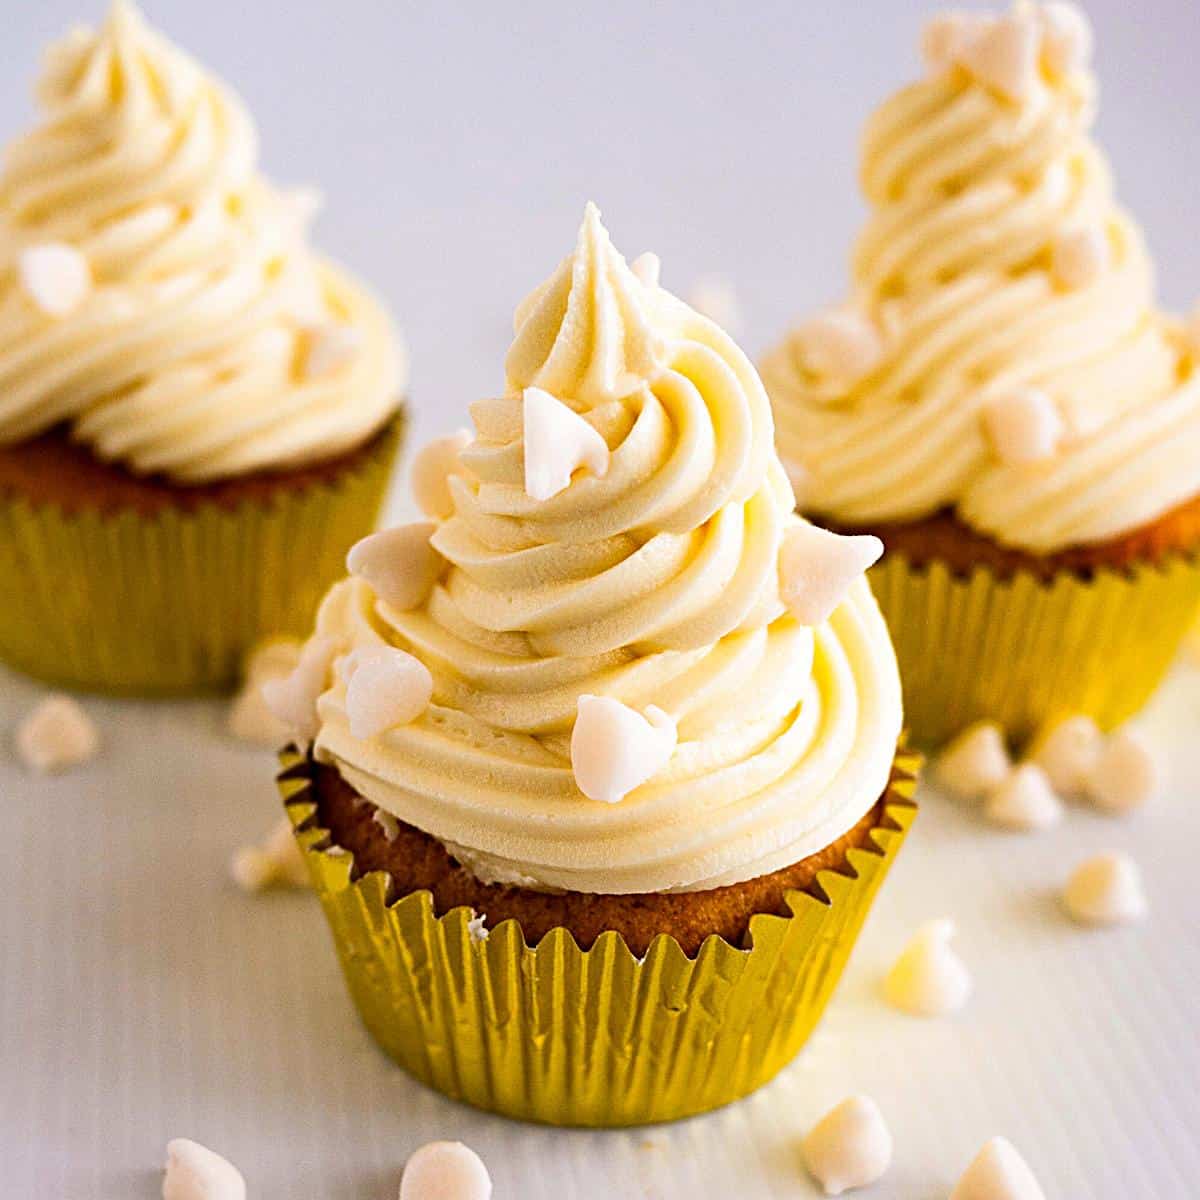 Cupcakes with white chocolate frosting.